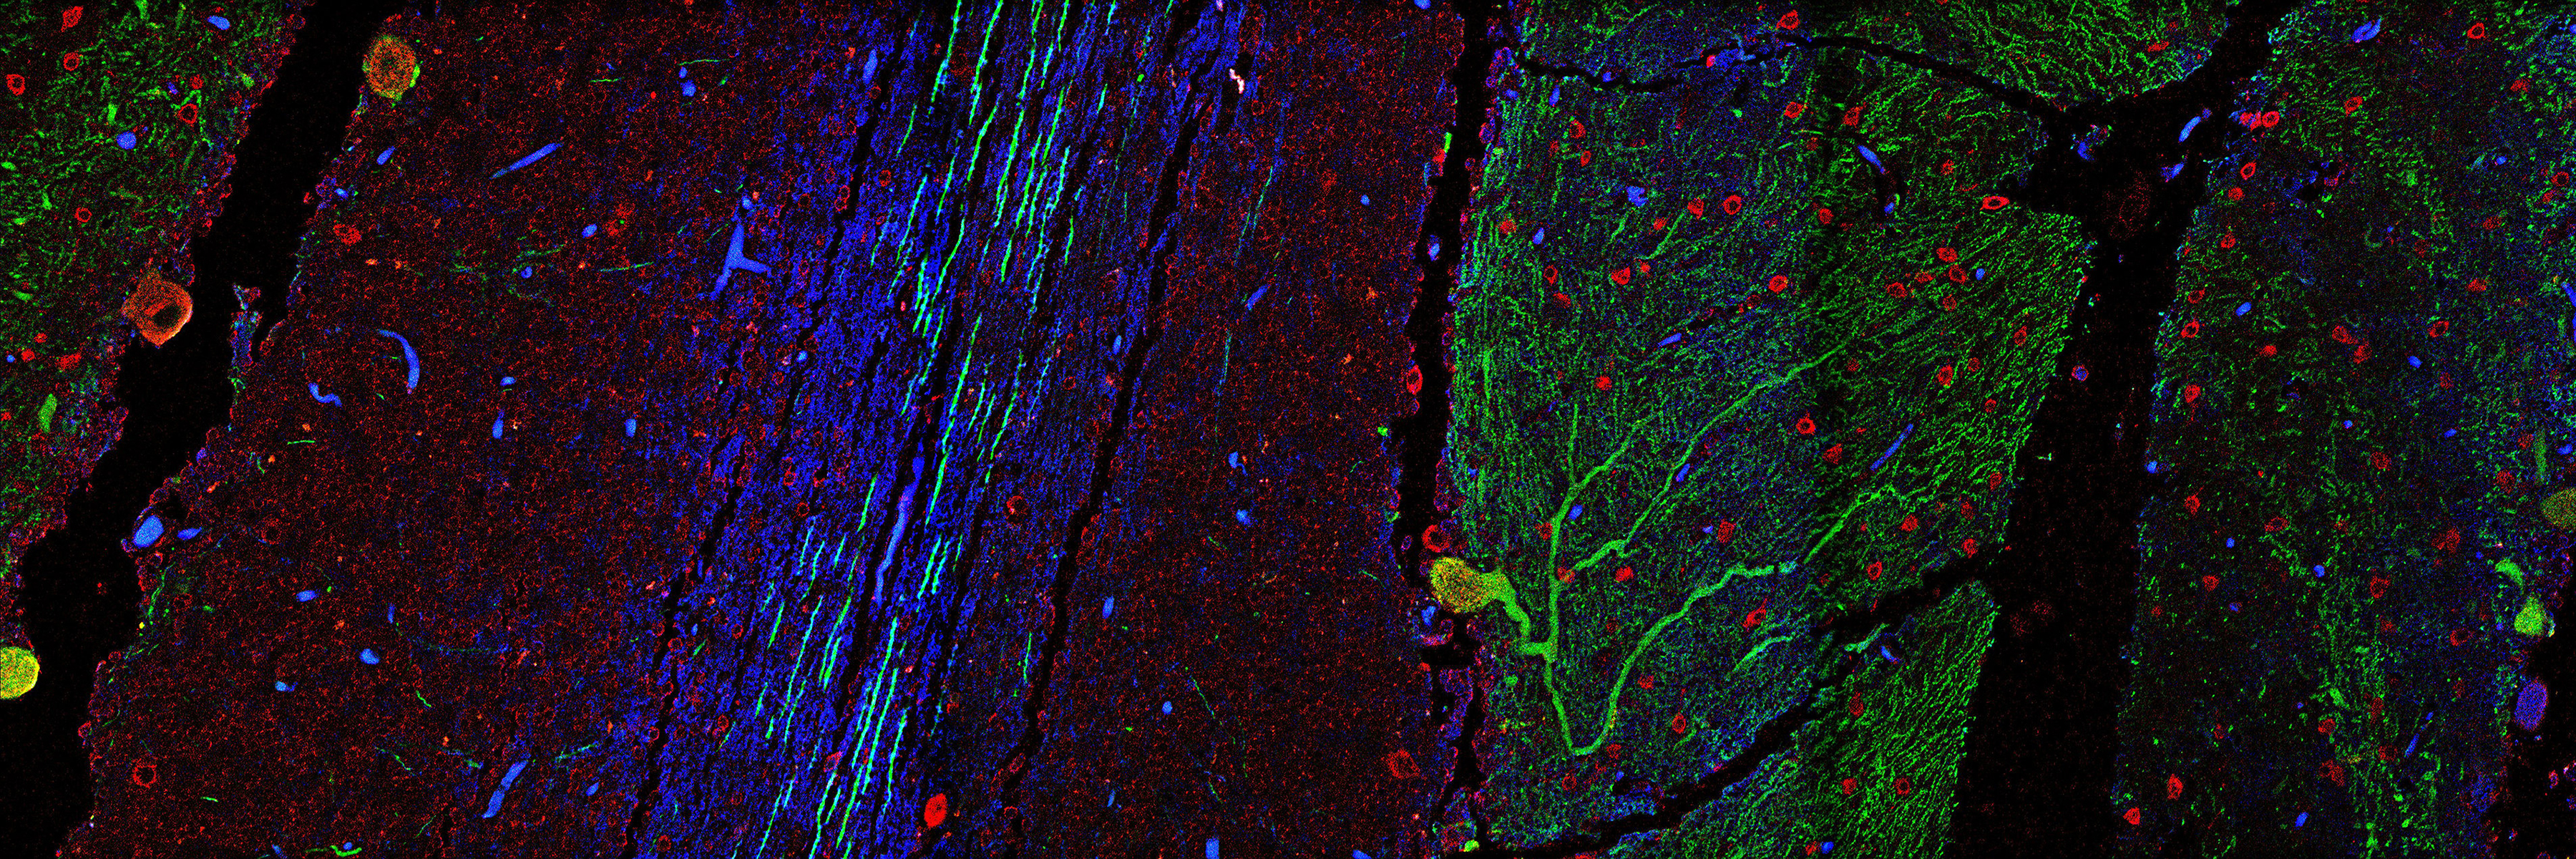 Each layer of the cerebellum can be seen in this tissue slice from a study of patients with Ataxia-Telangiectasia (A-T), an early childhood onset neurodegenerative disorder specific to the cerebellum. 